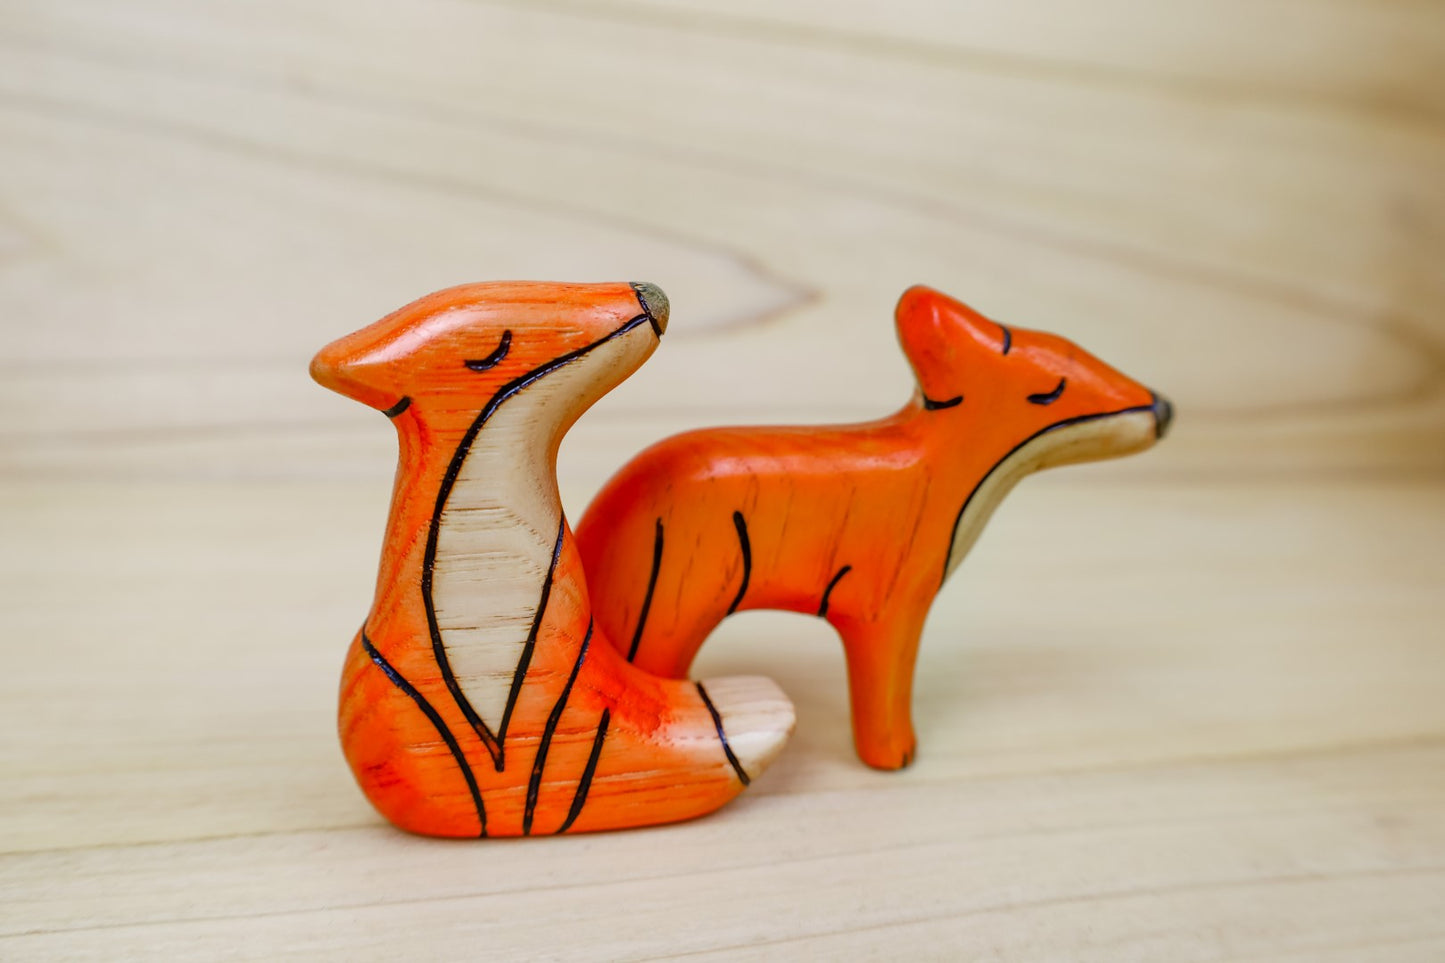 Wooden Fox Toy- Sitting Or Standing Fox